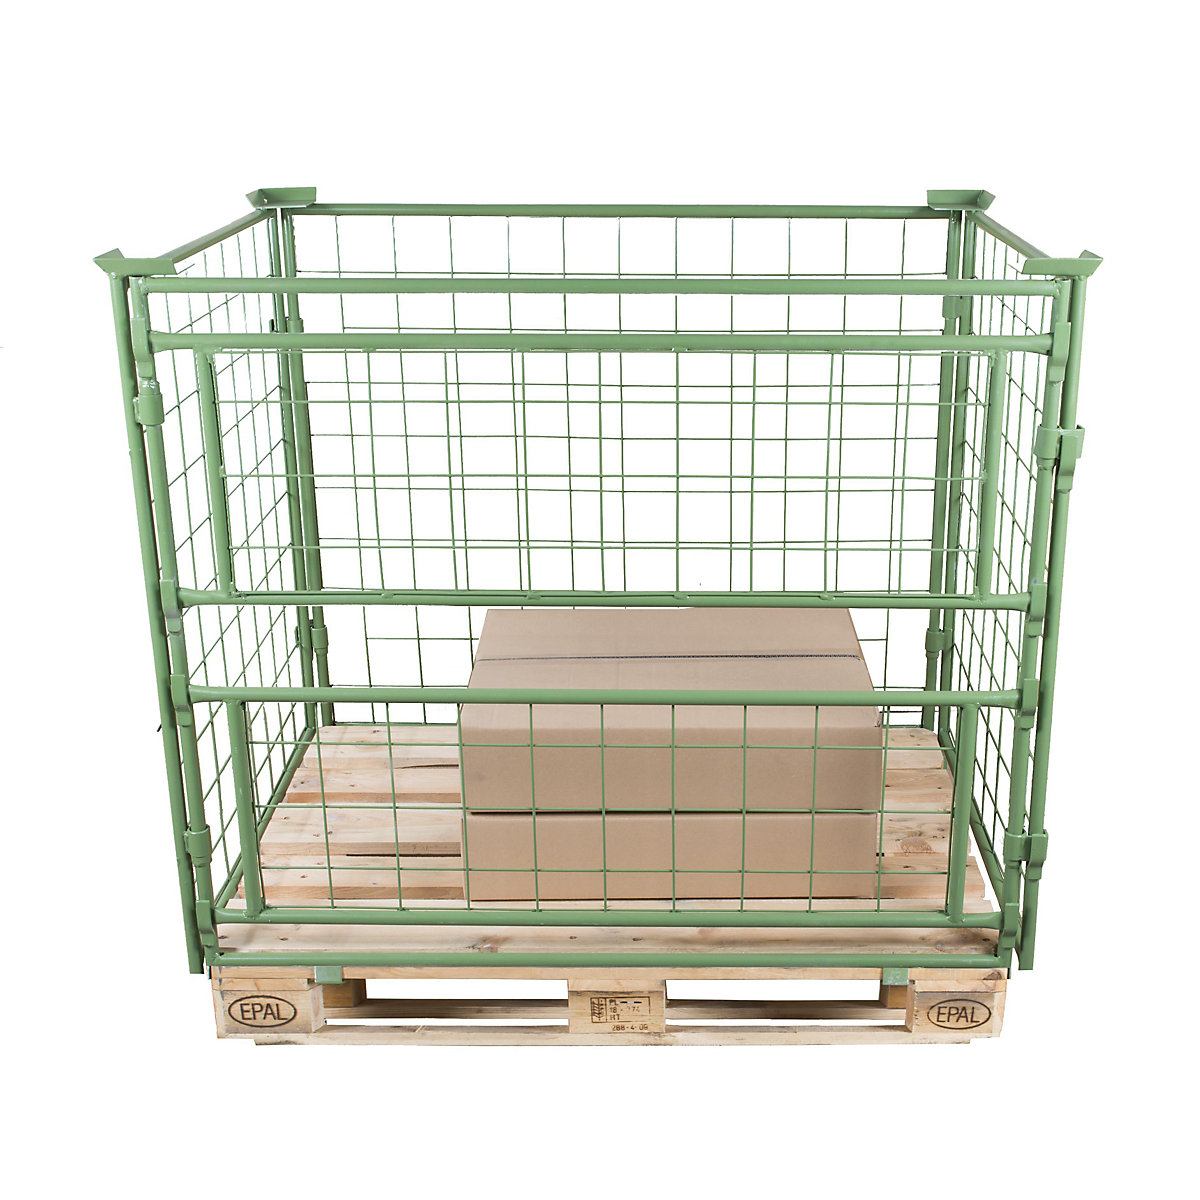 Pallet frame, effective height 1000 mm, for stacking, WxL 800 x 1200 mm, 1 long side with 2 parts, removable-2